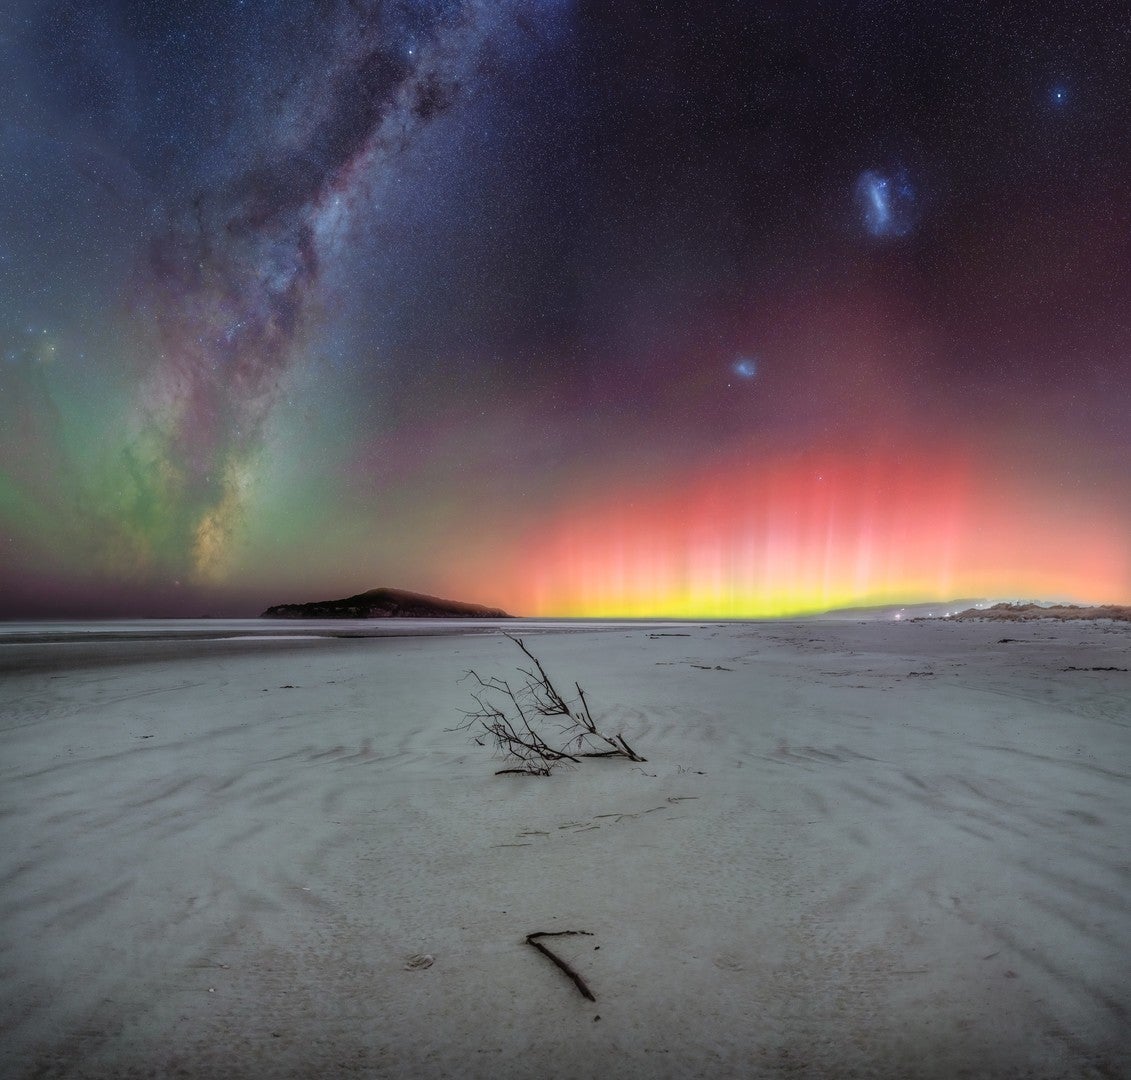 The aurora — as well as countless stars in our galaxy — over New Zealand. (Photo: Kavan Chay)